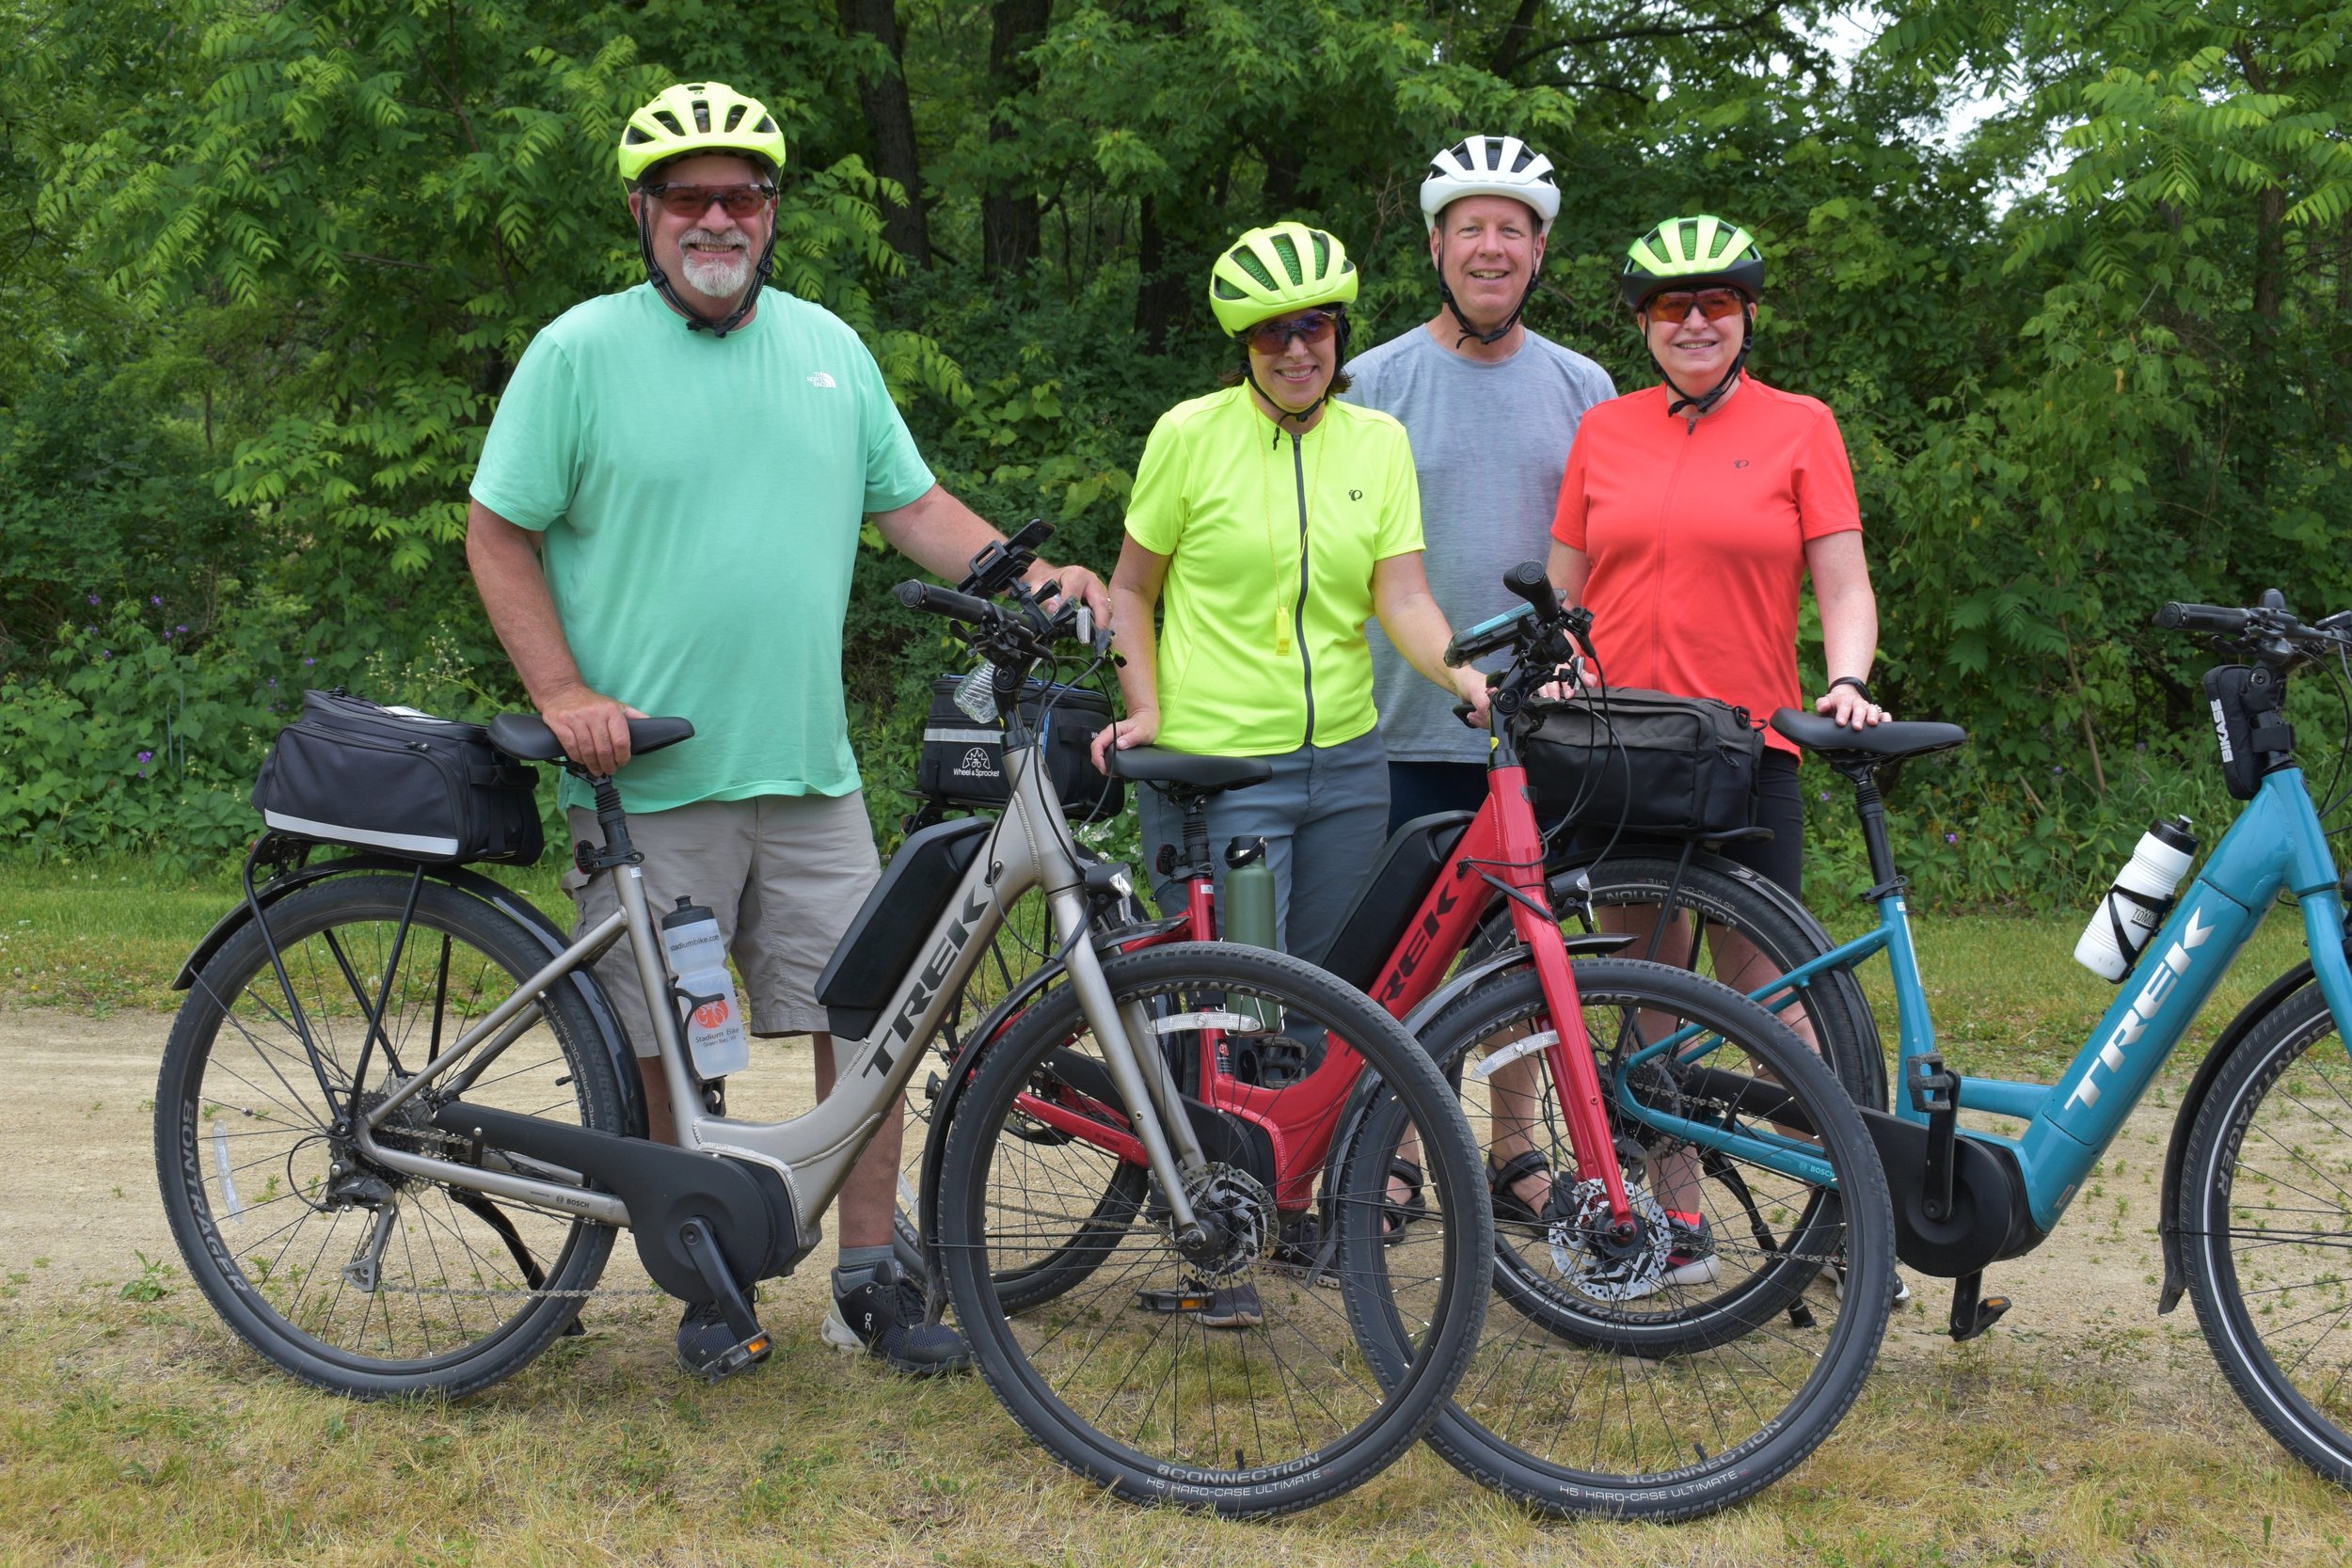  L to R: Dan and Tracey Suehring of Green Bay, Dave and Jenny Provancher of the Milwaukee area. 